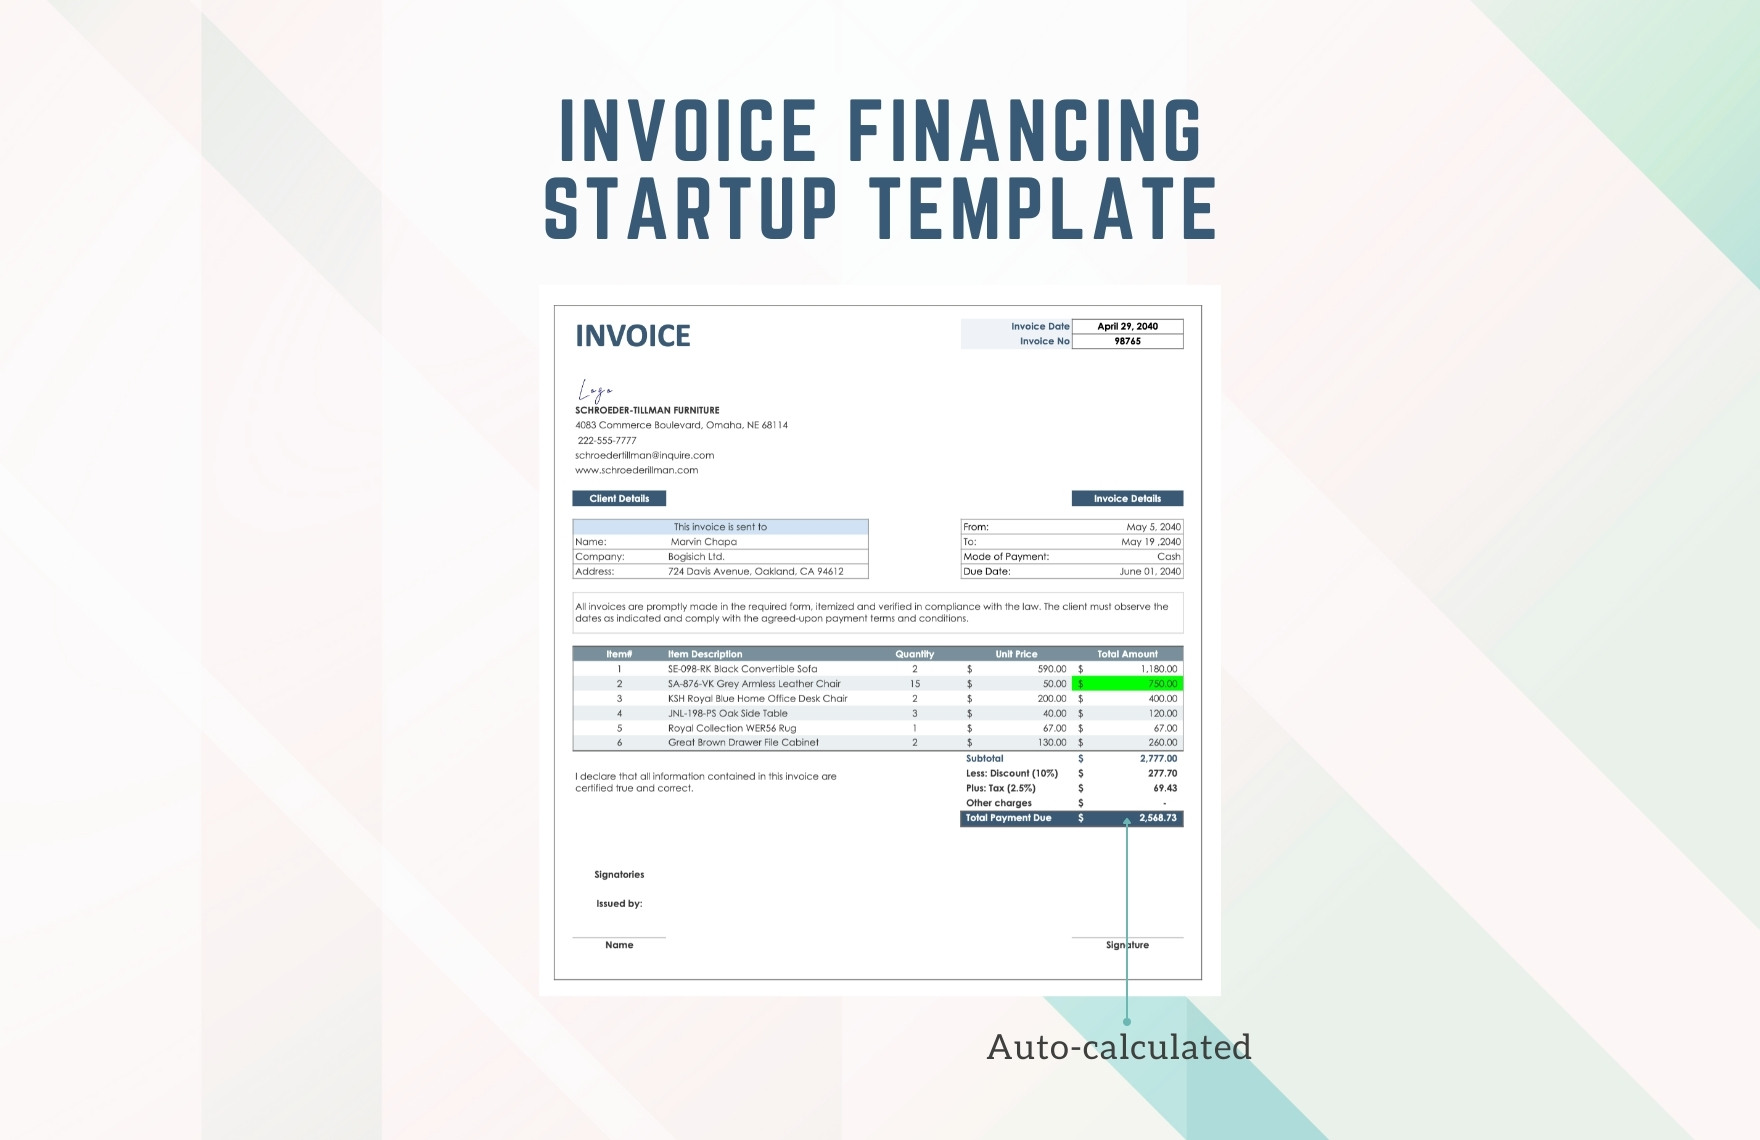 Invoice Financing Startup Template